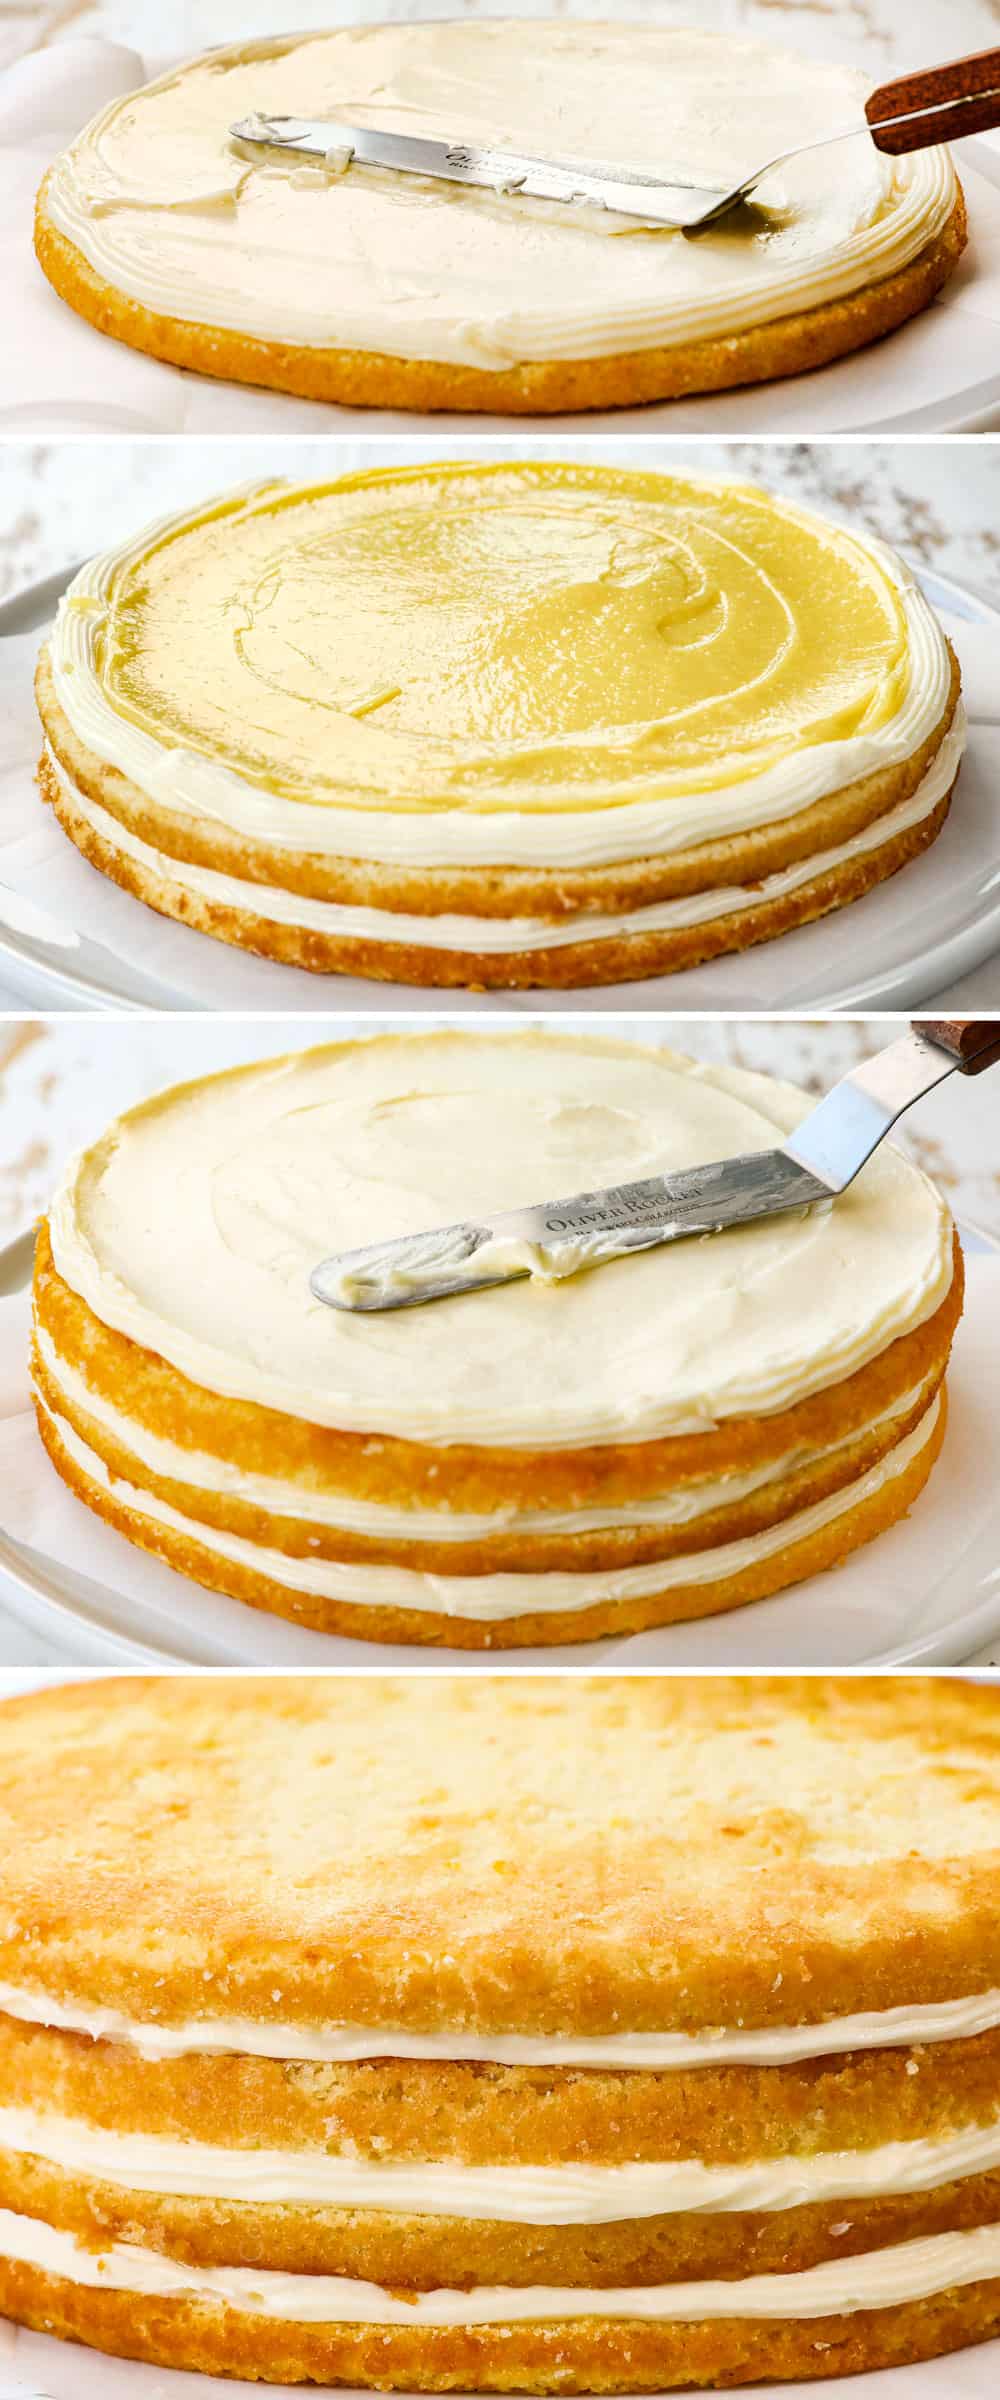 showing how to make lemon cake recipe by 1) topping 1st layer with frosting, 2) adding lemon curd to second layer, 3)  adding frosting to 3rd layer, 4) topping with final cake